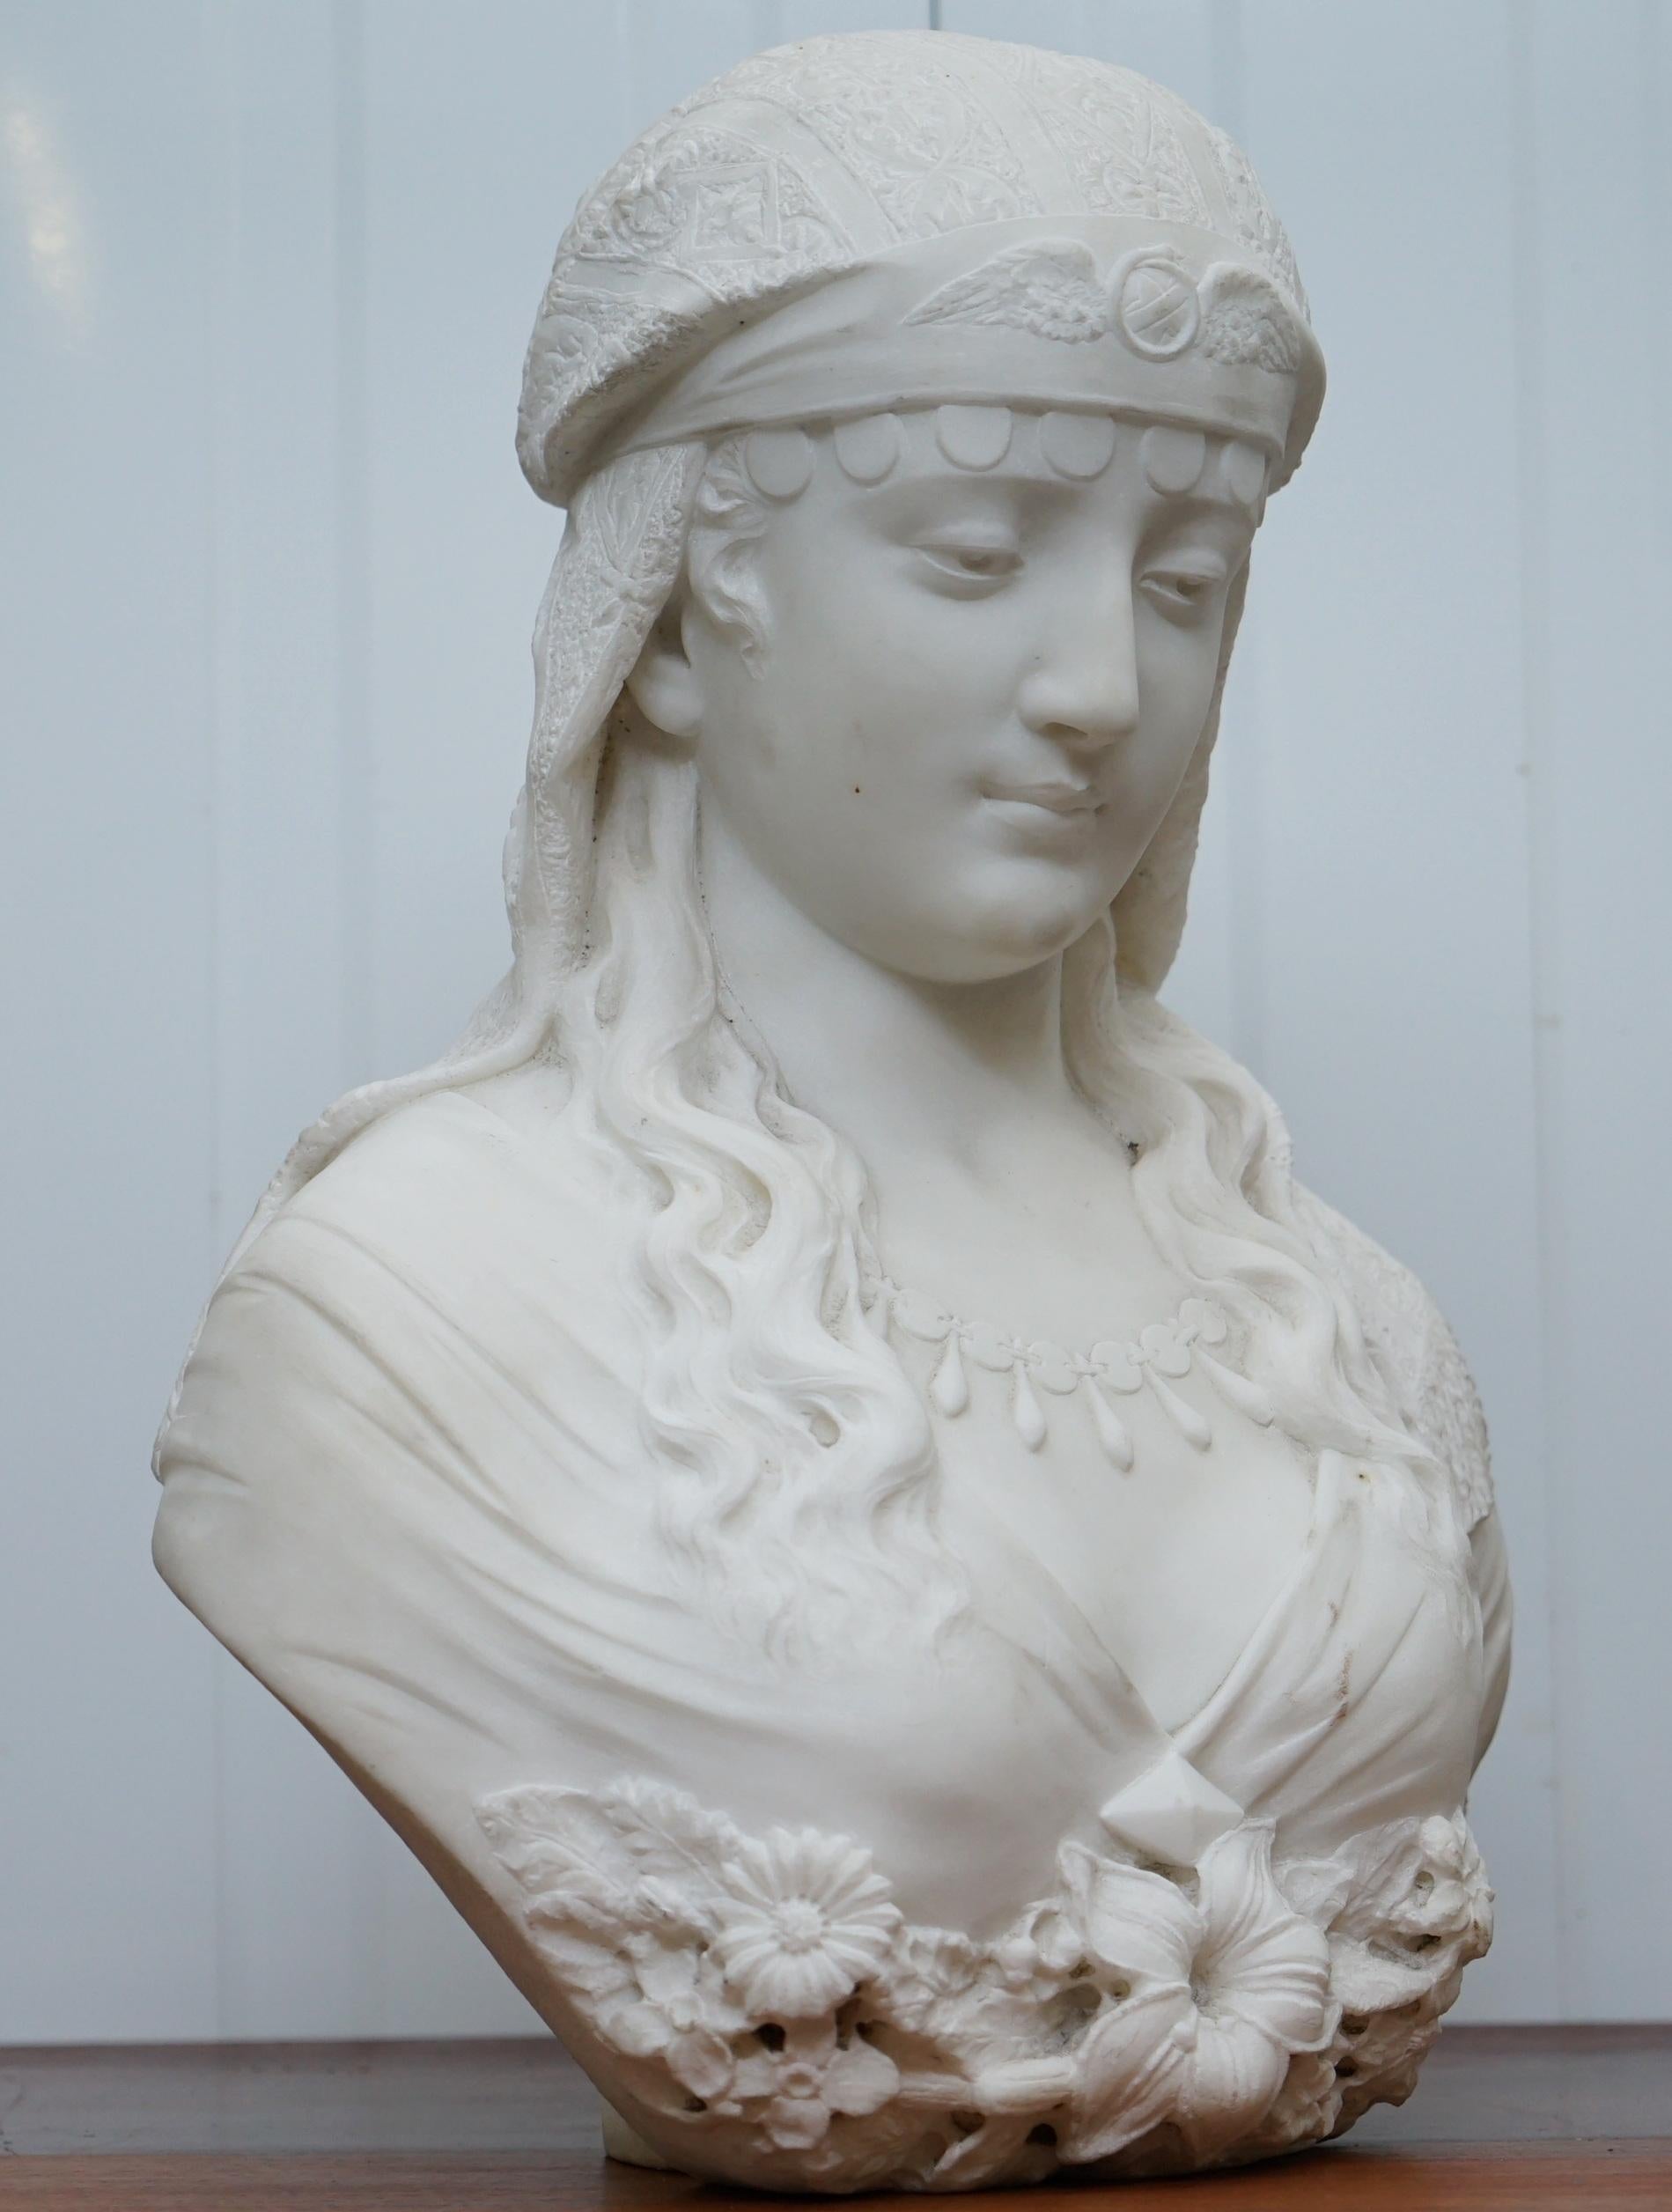 We are delighted to offer for sale this rare and quite exquisite 19th-century Italian white marble bust of a Maiden draped with flowers, a headscarf and necklace

A very romantic and idyllic looking piece, the expression on the good ladies face is